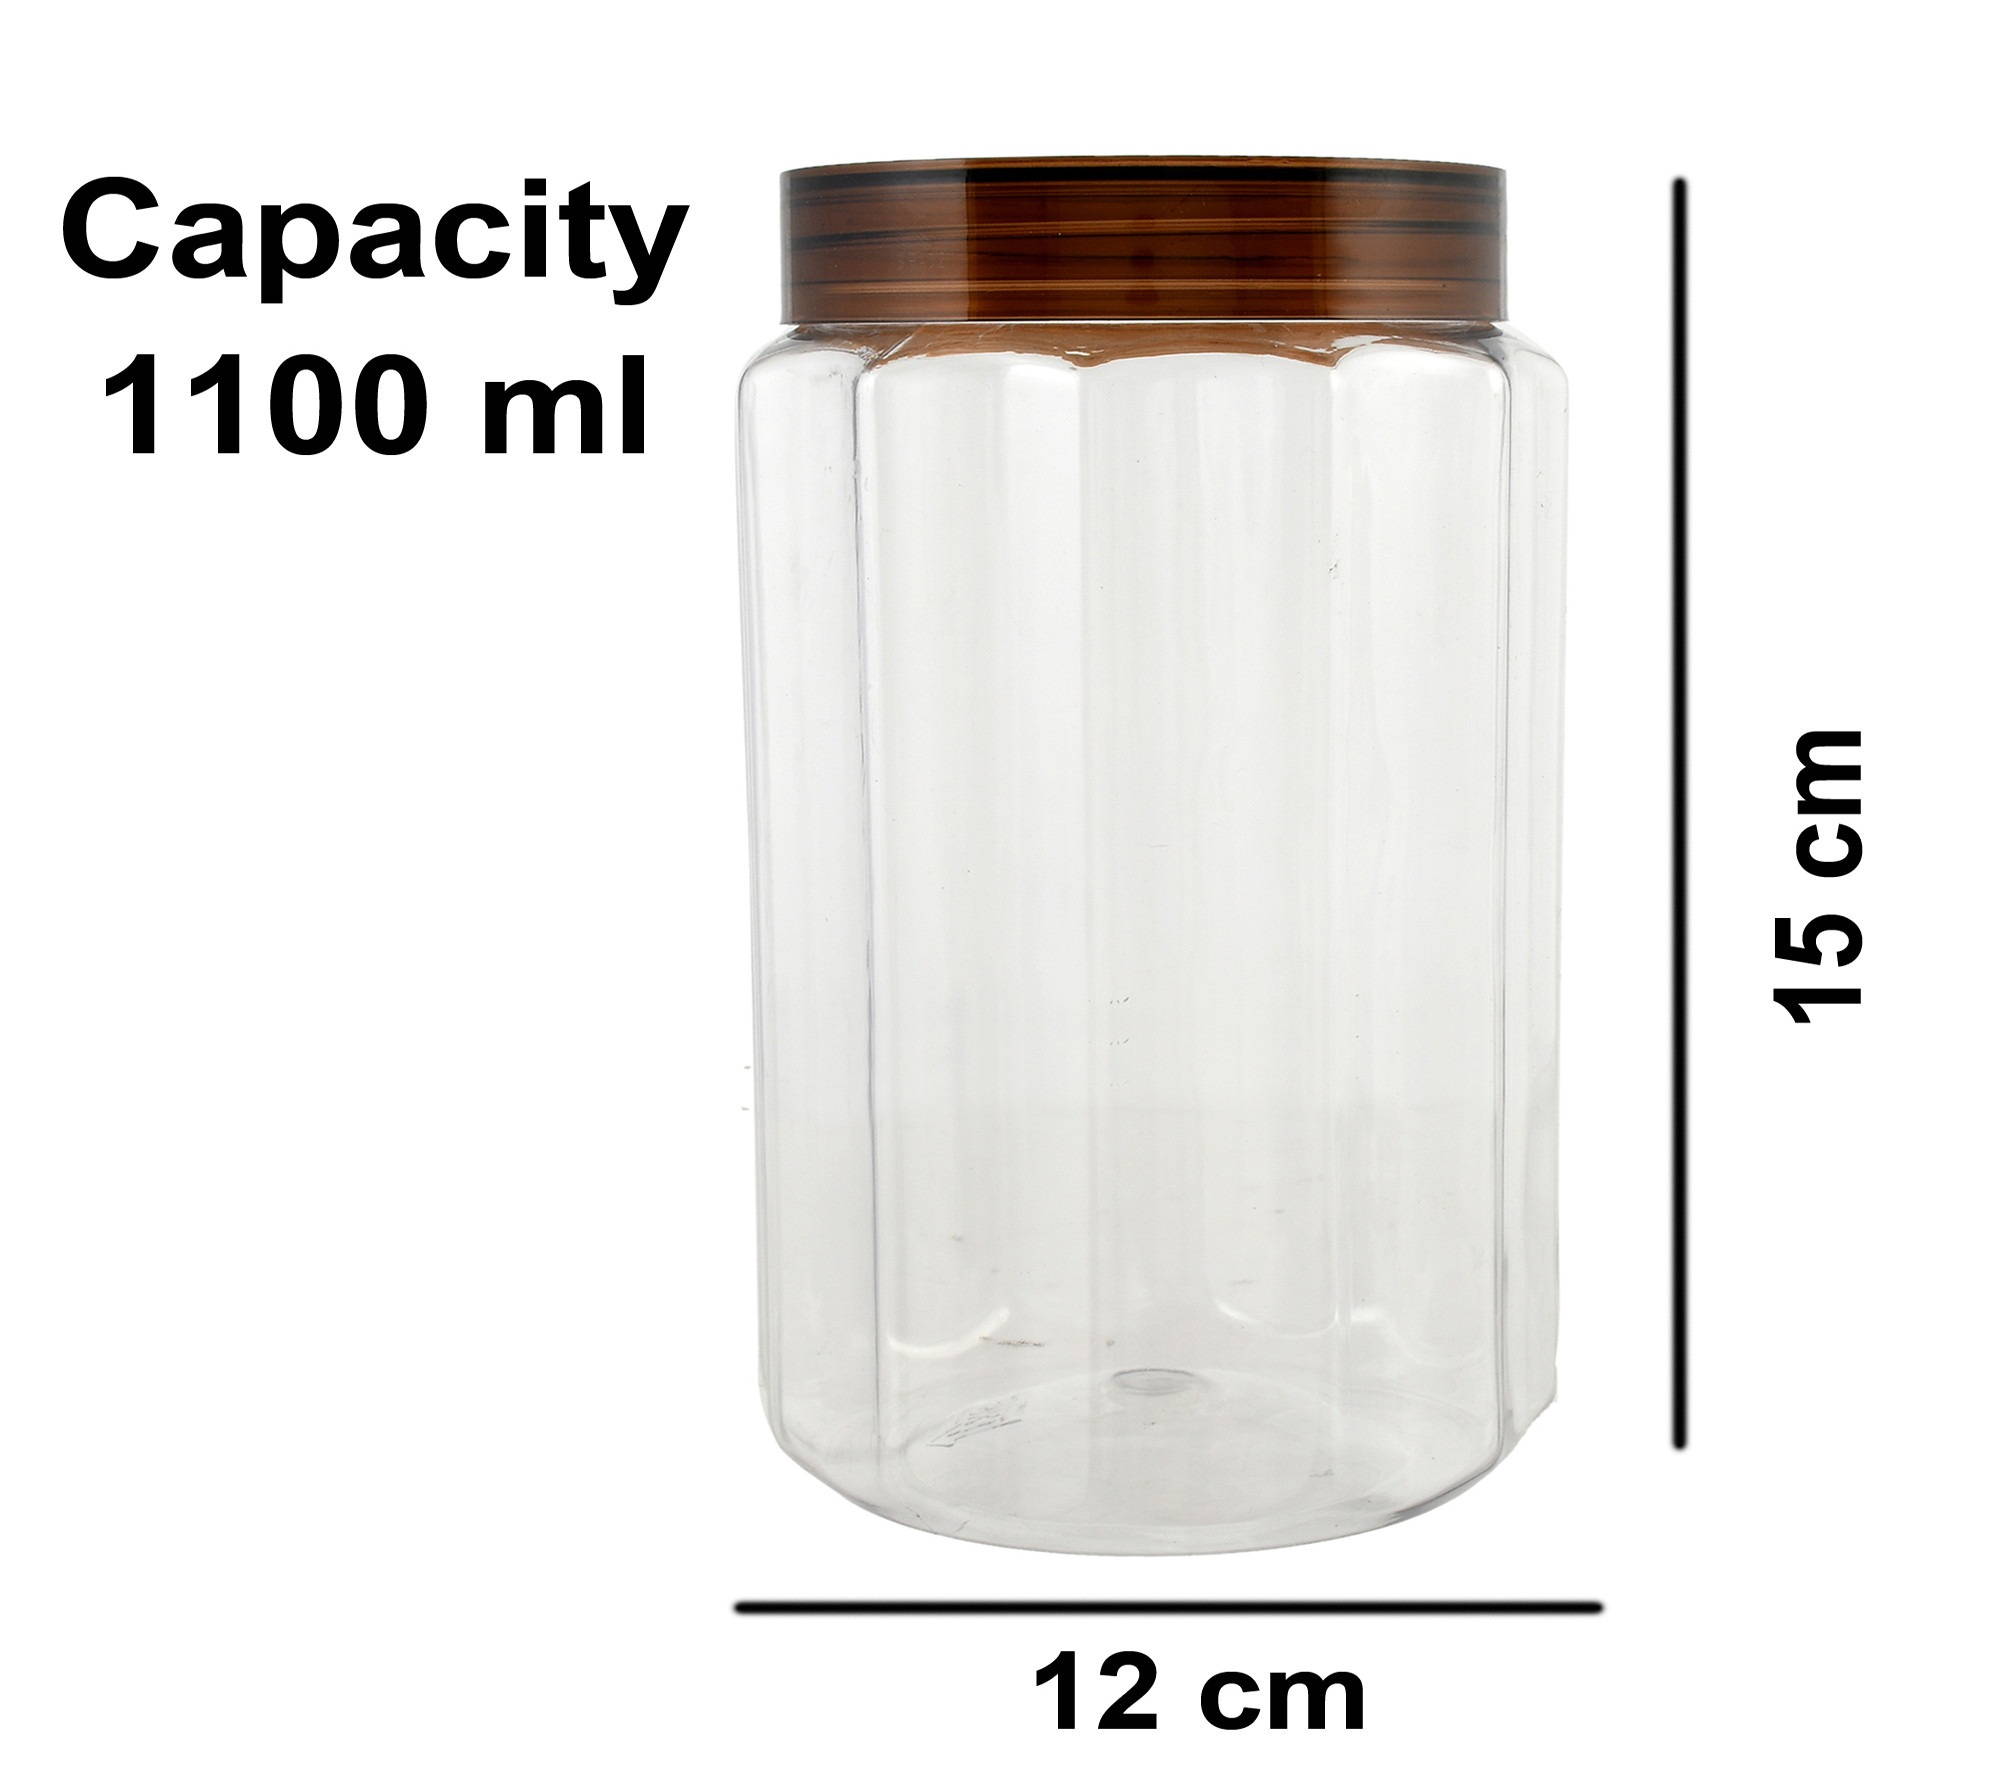 Kuber Industries Opal Airtight Food Storage Containers Kitchen Containers for Storage Set Plastic Storage Box for Kitchen Airtight Containers Storage Jar Set for Kitchen Storage (Set Of 6,800,1100 ml, Brown)